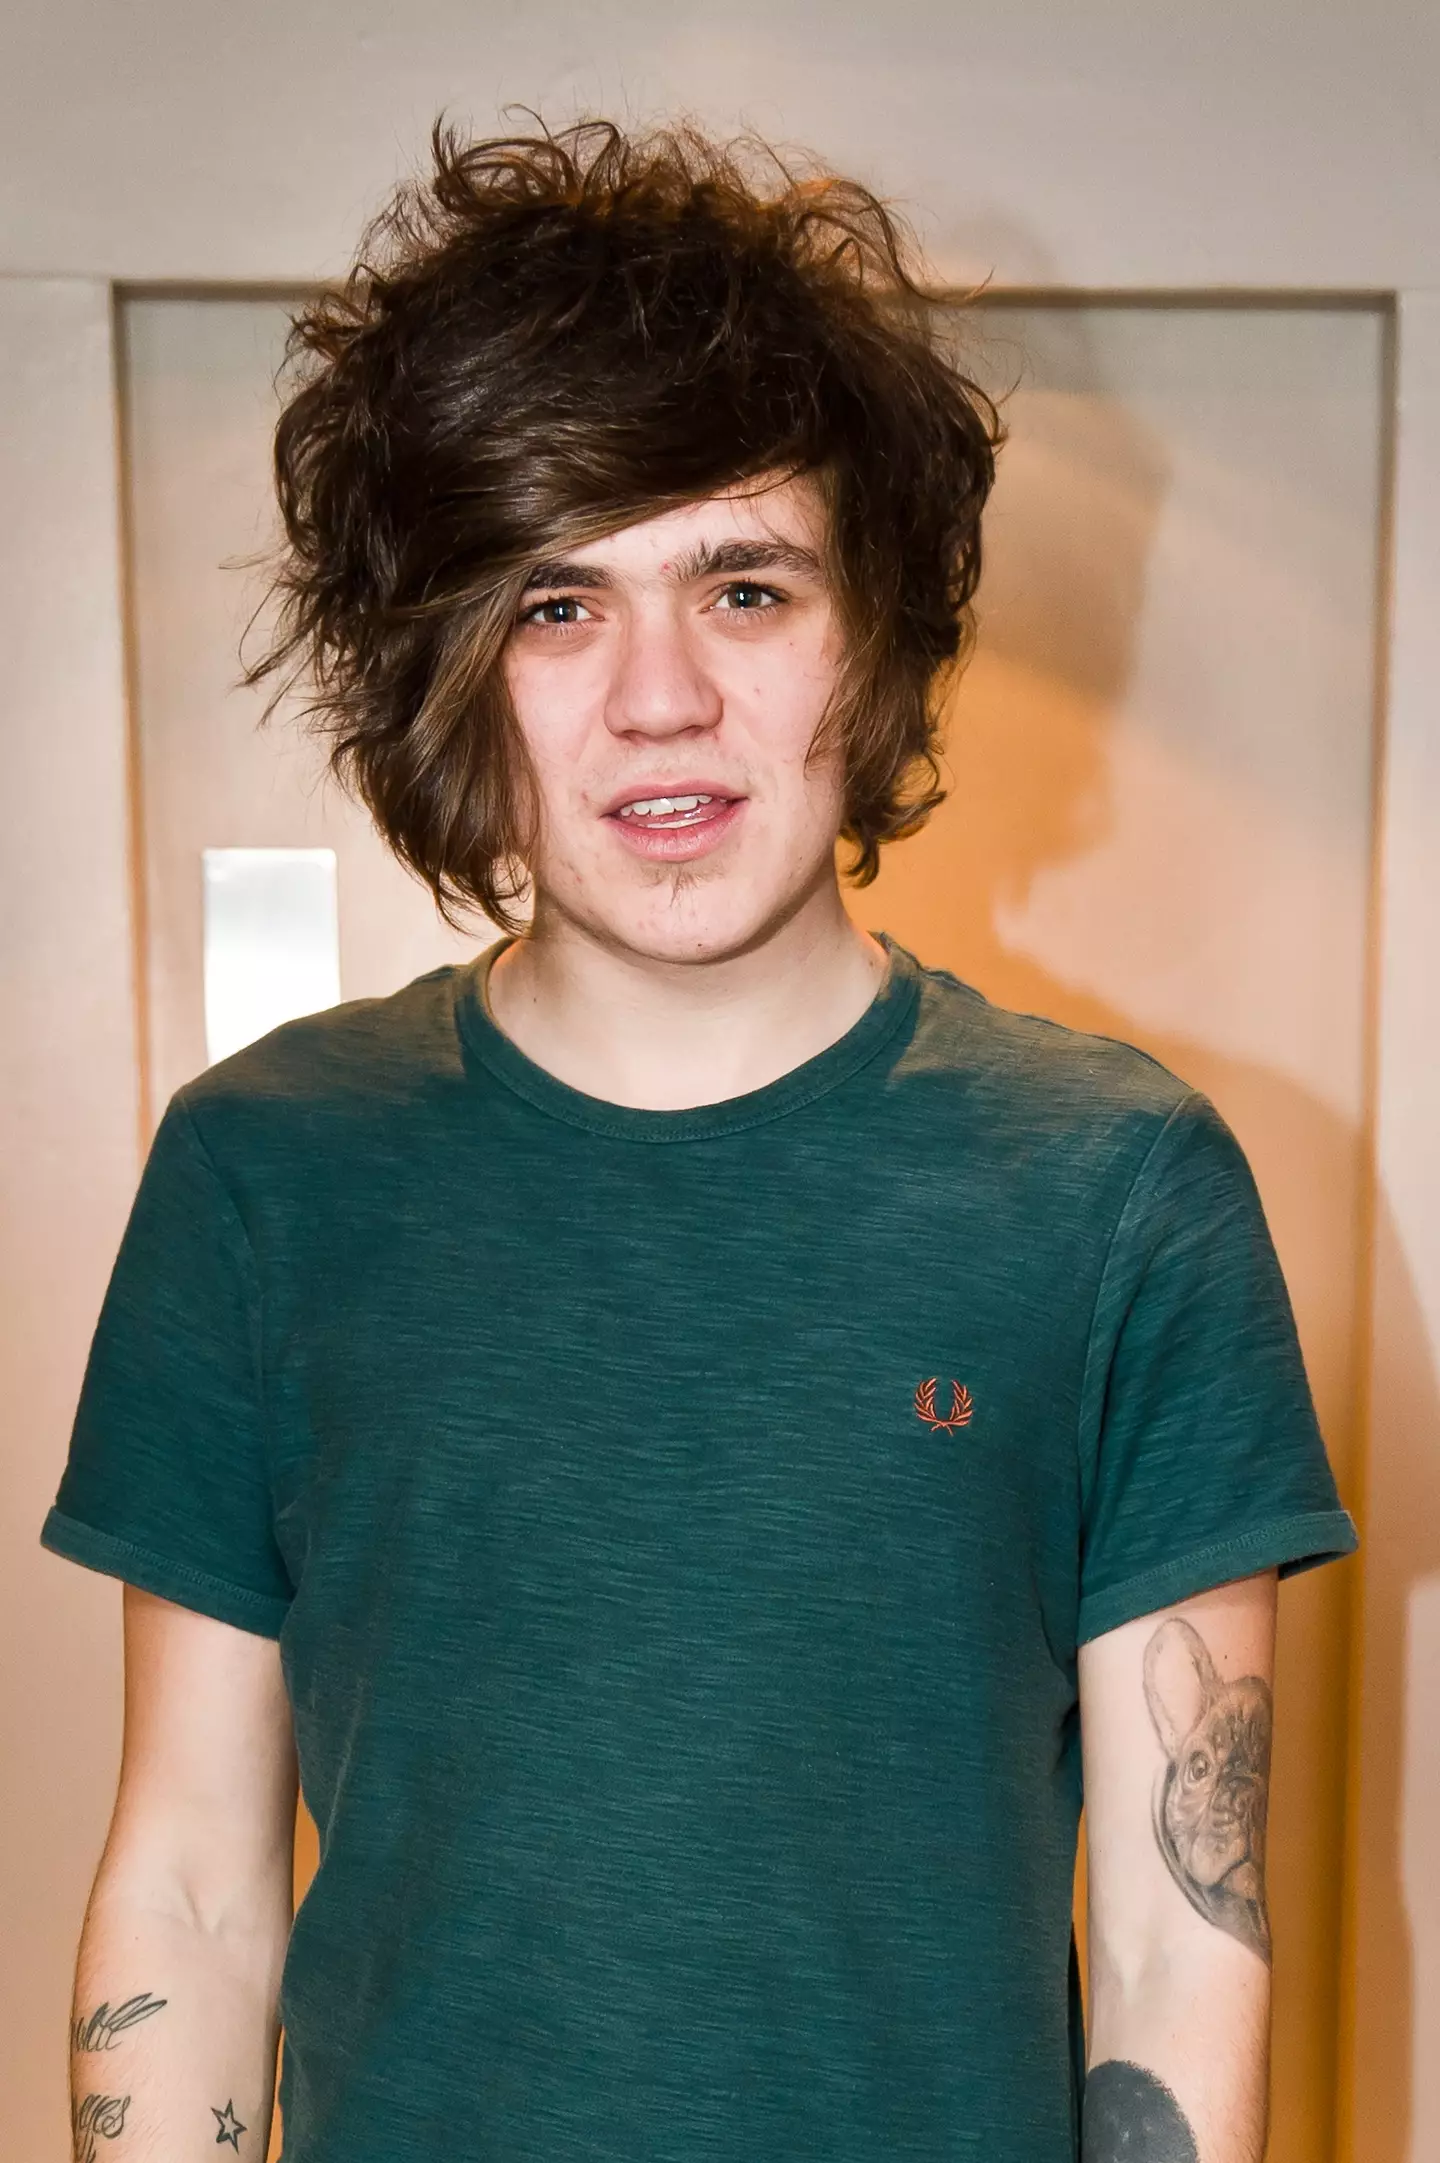 Frankie Cocozza appeared on the X Factor when he was 18.